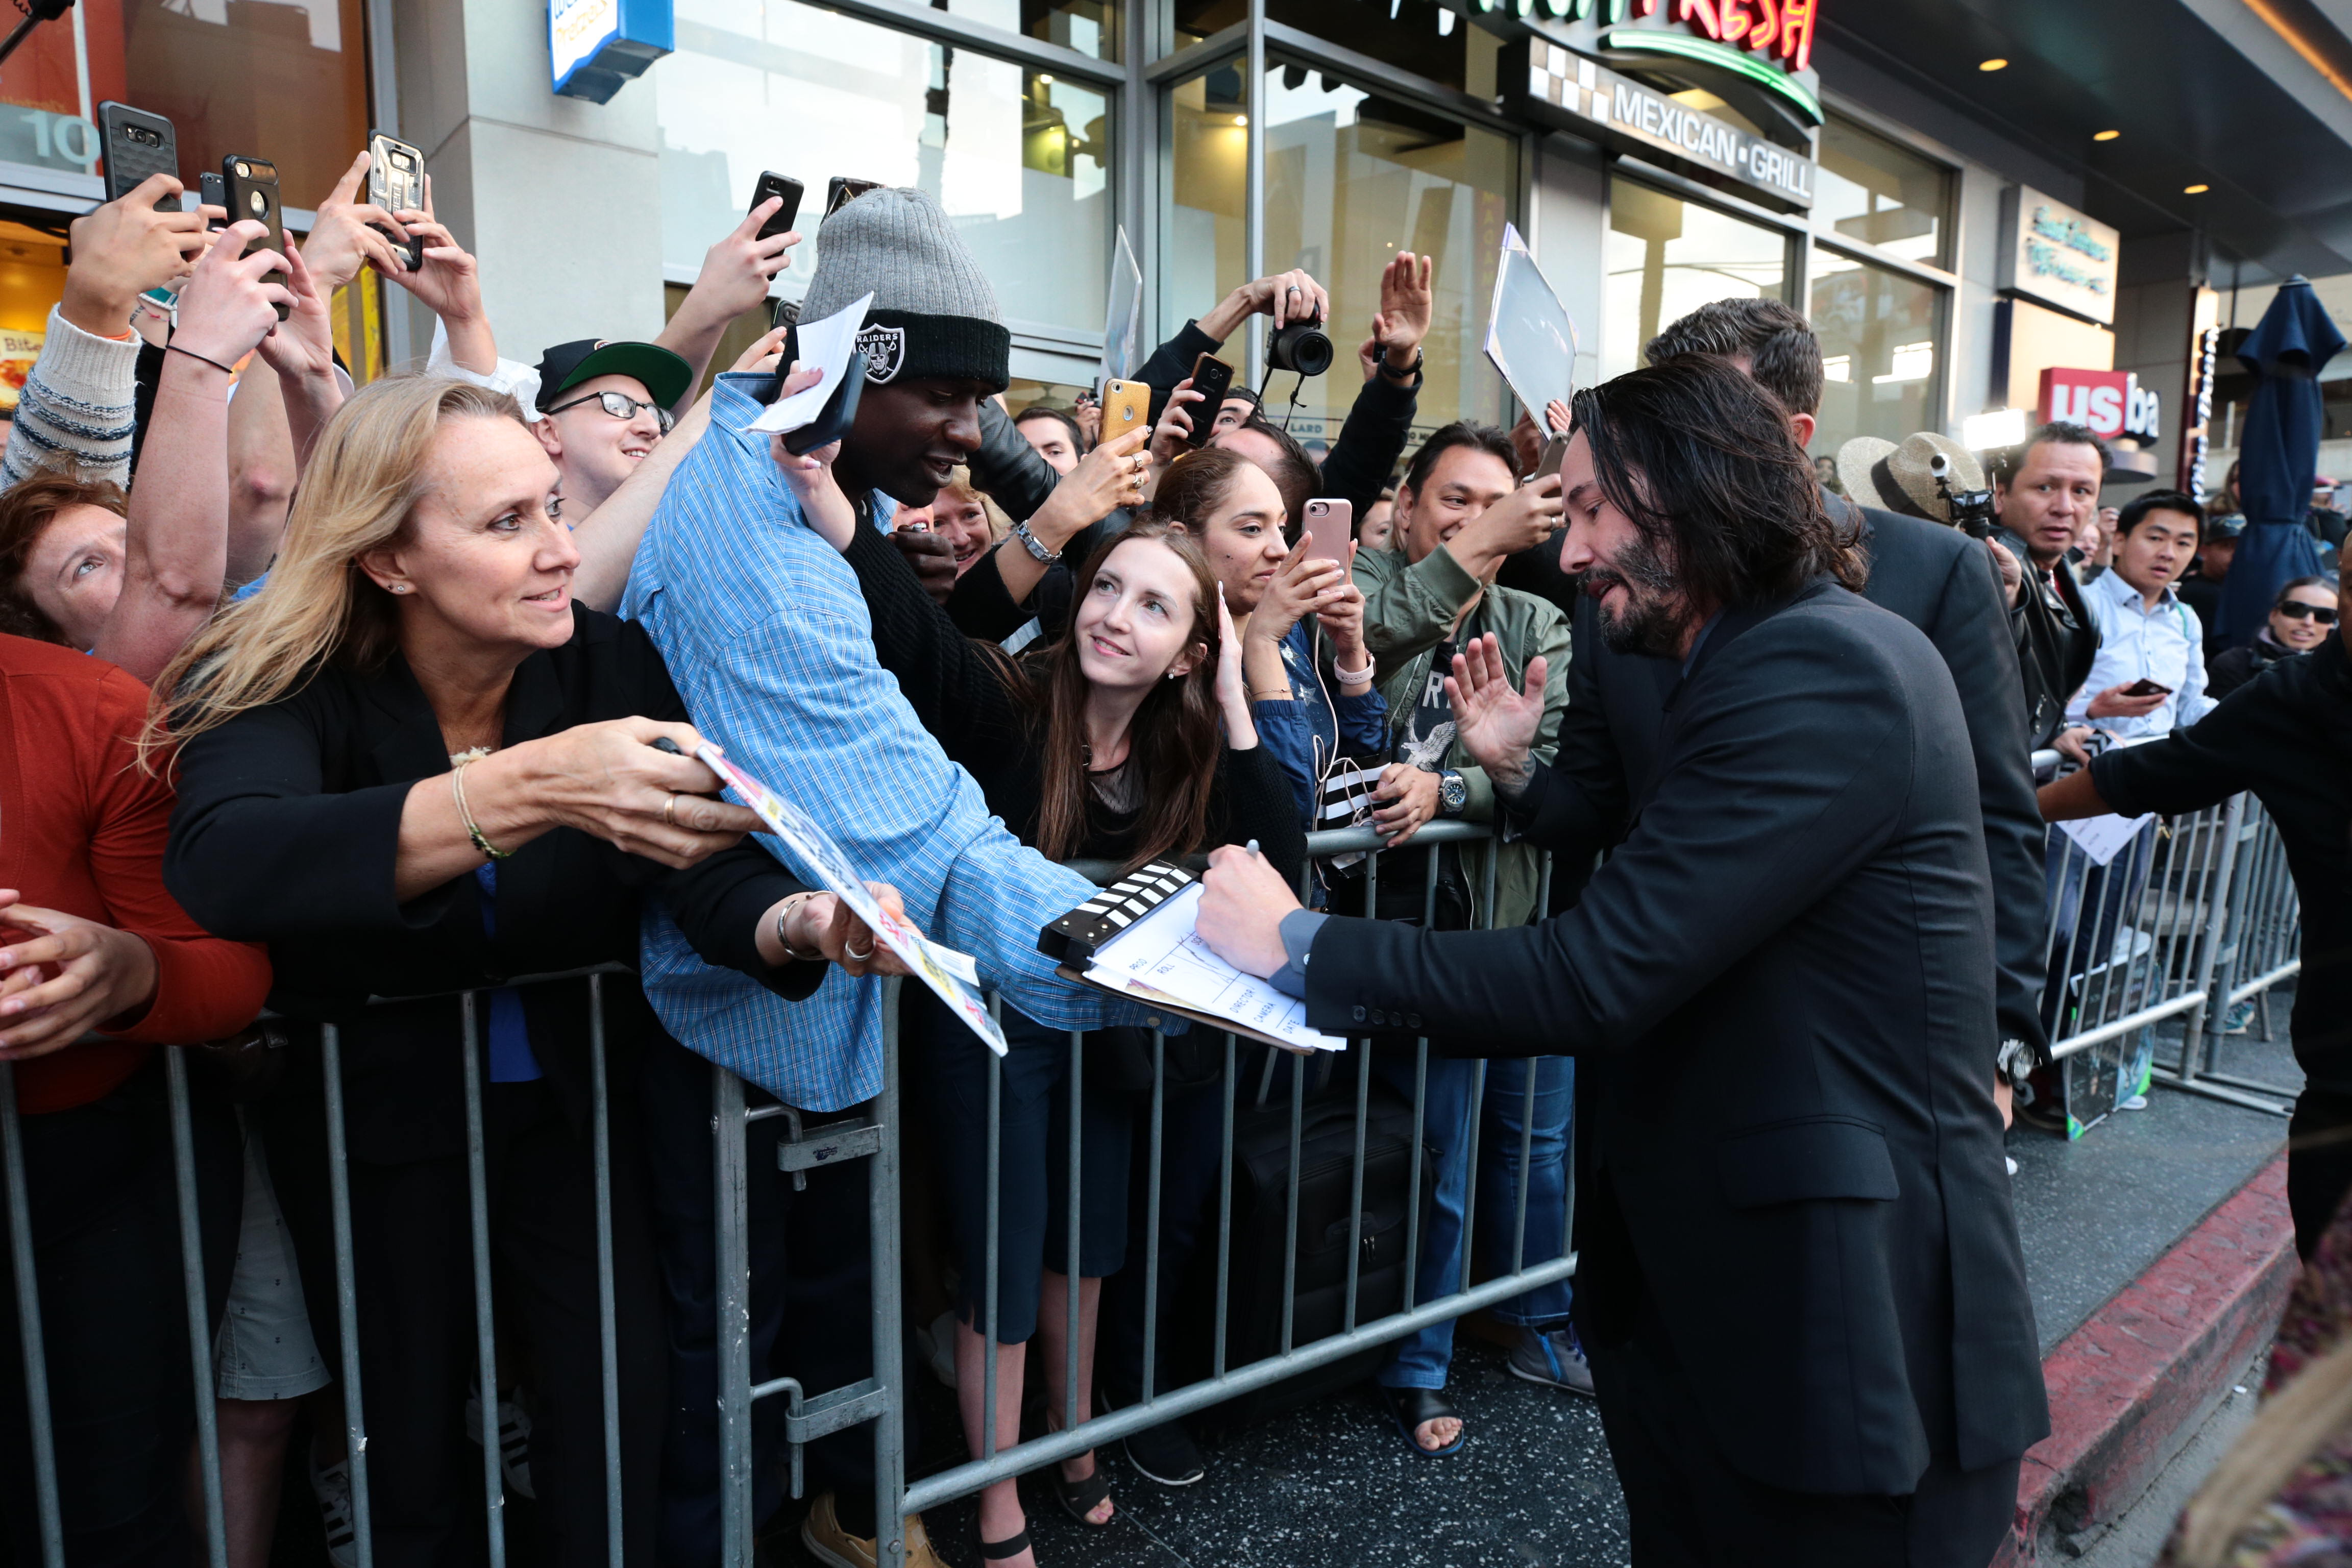 Keanu Reeves at Lionsgate presents the Special Screening of "John Wick: Chapter 3 - Parabellum" in Los Angeles, California, on May 15, 2019. | Source: Getty Images